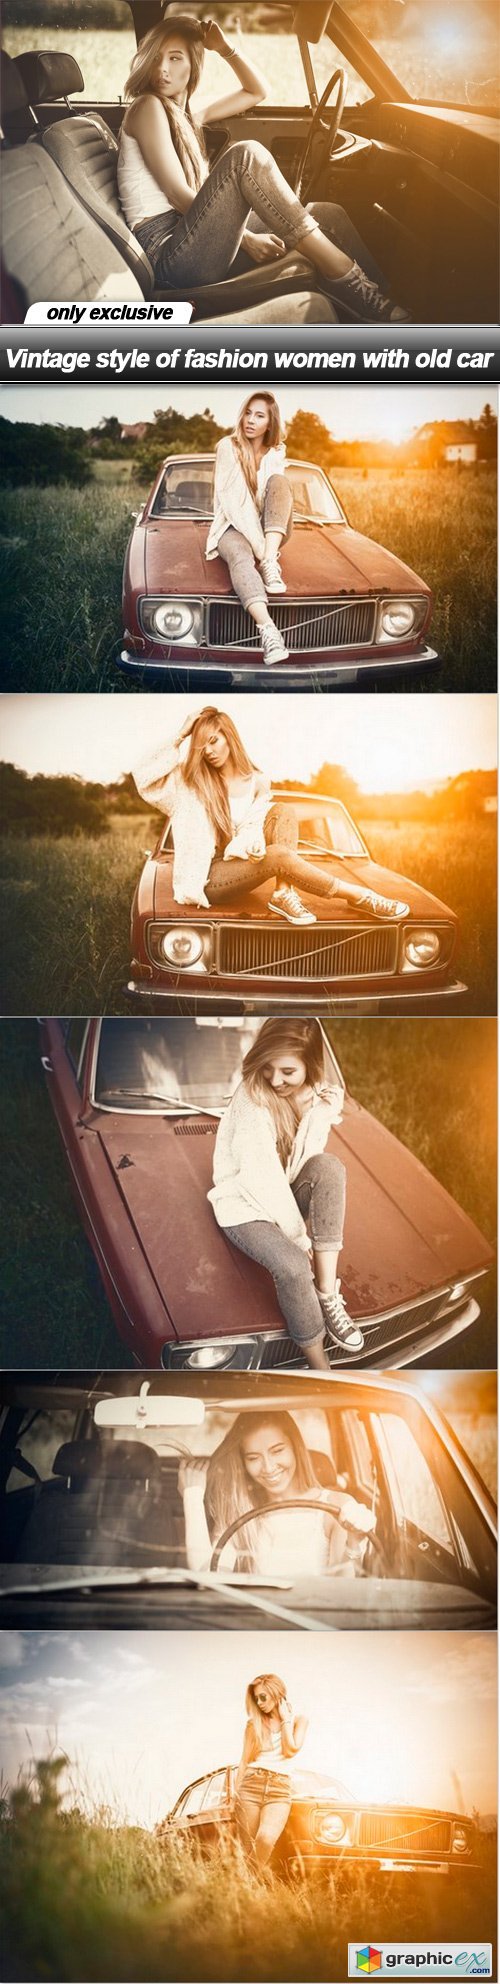 Vintage style of fashion women with old car - 6 UHQ JPEG